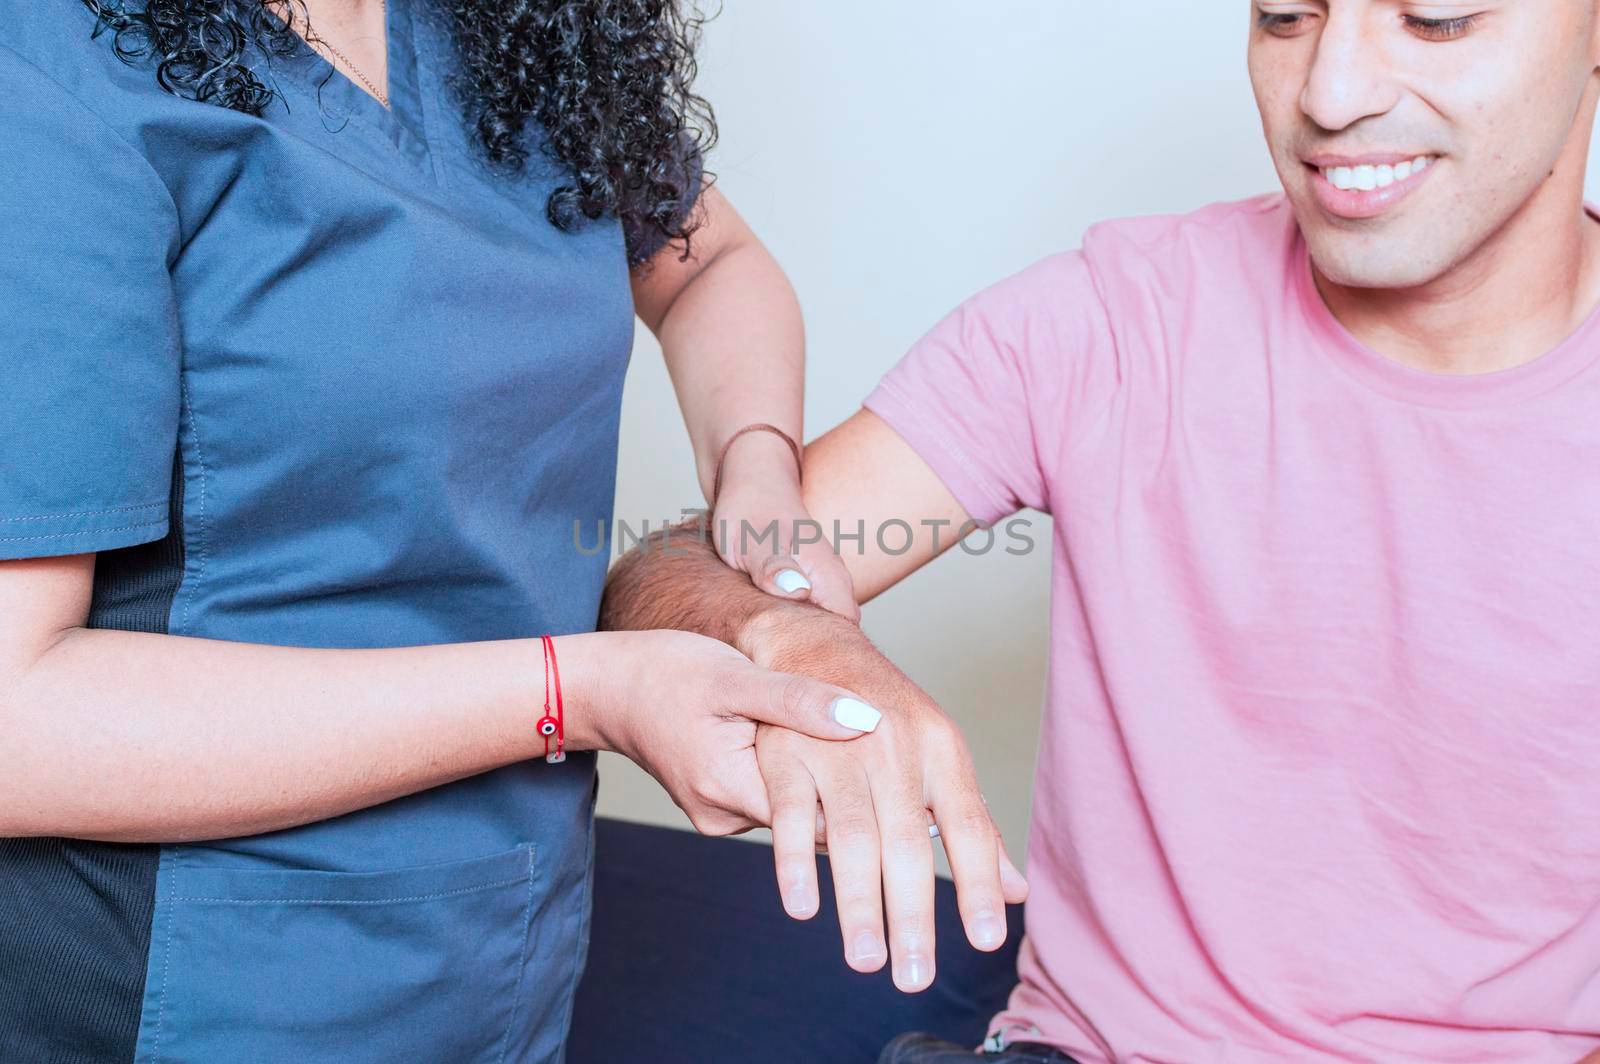 Physiotherapist with patient wrist assessment, wrist rehabilitation physiotherapy, hand wrist assessment by isaiphoto